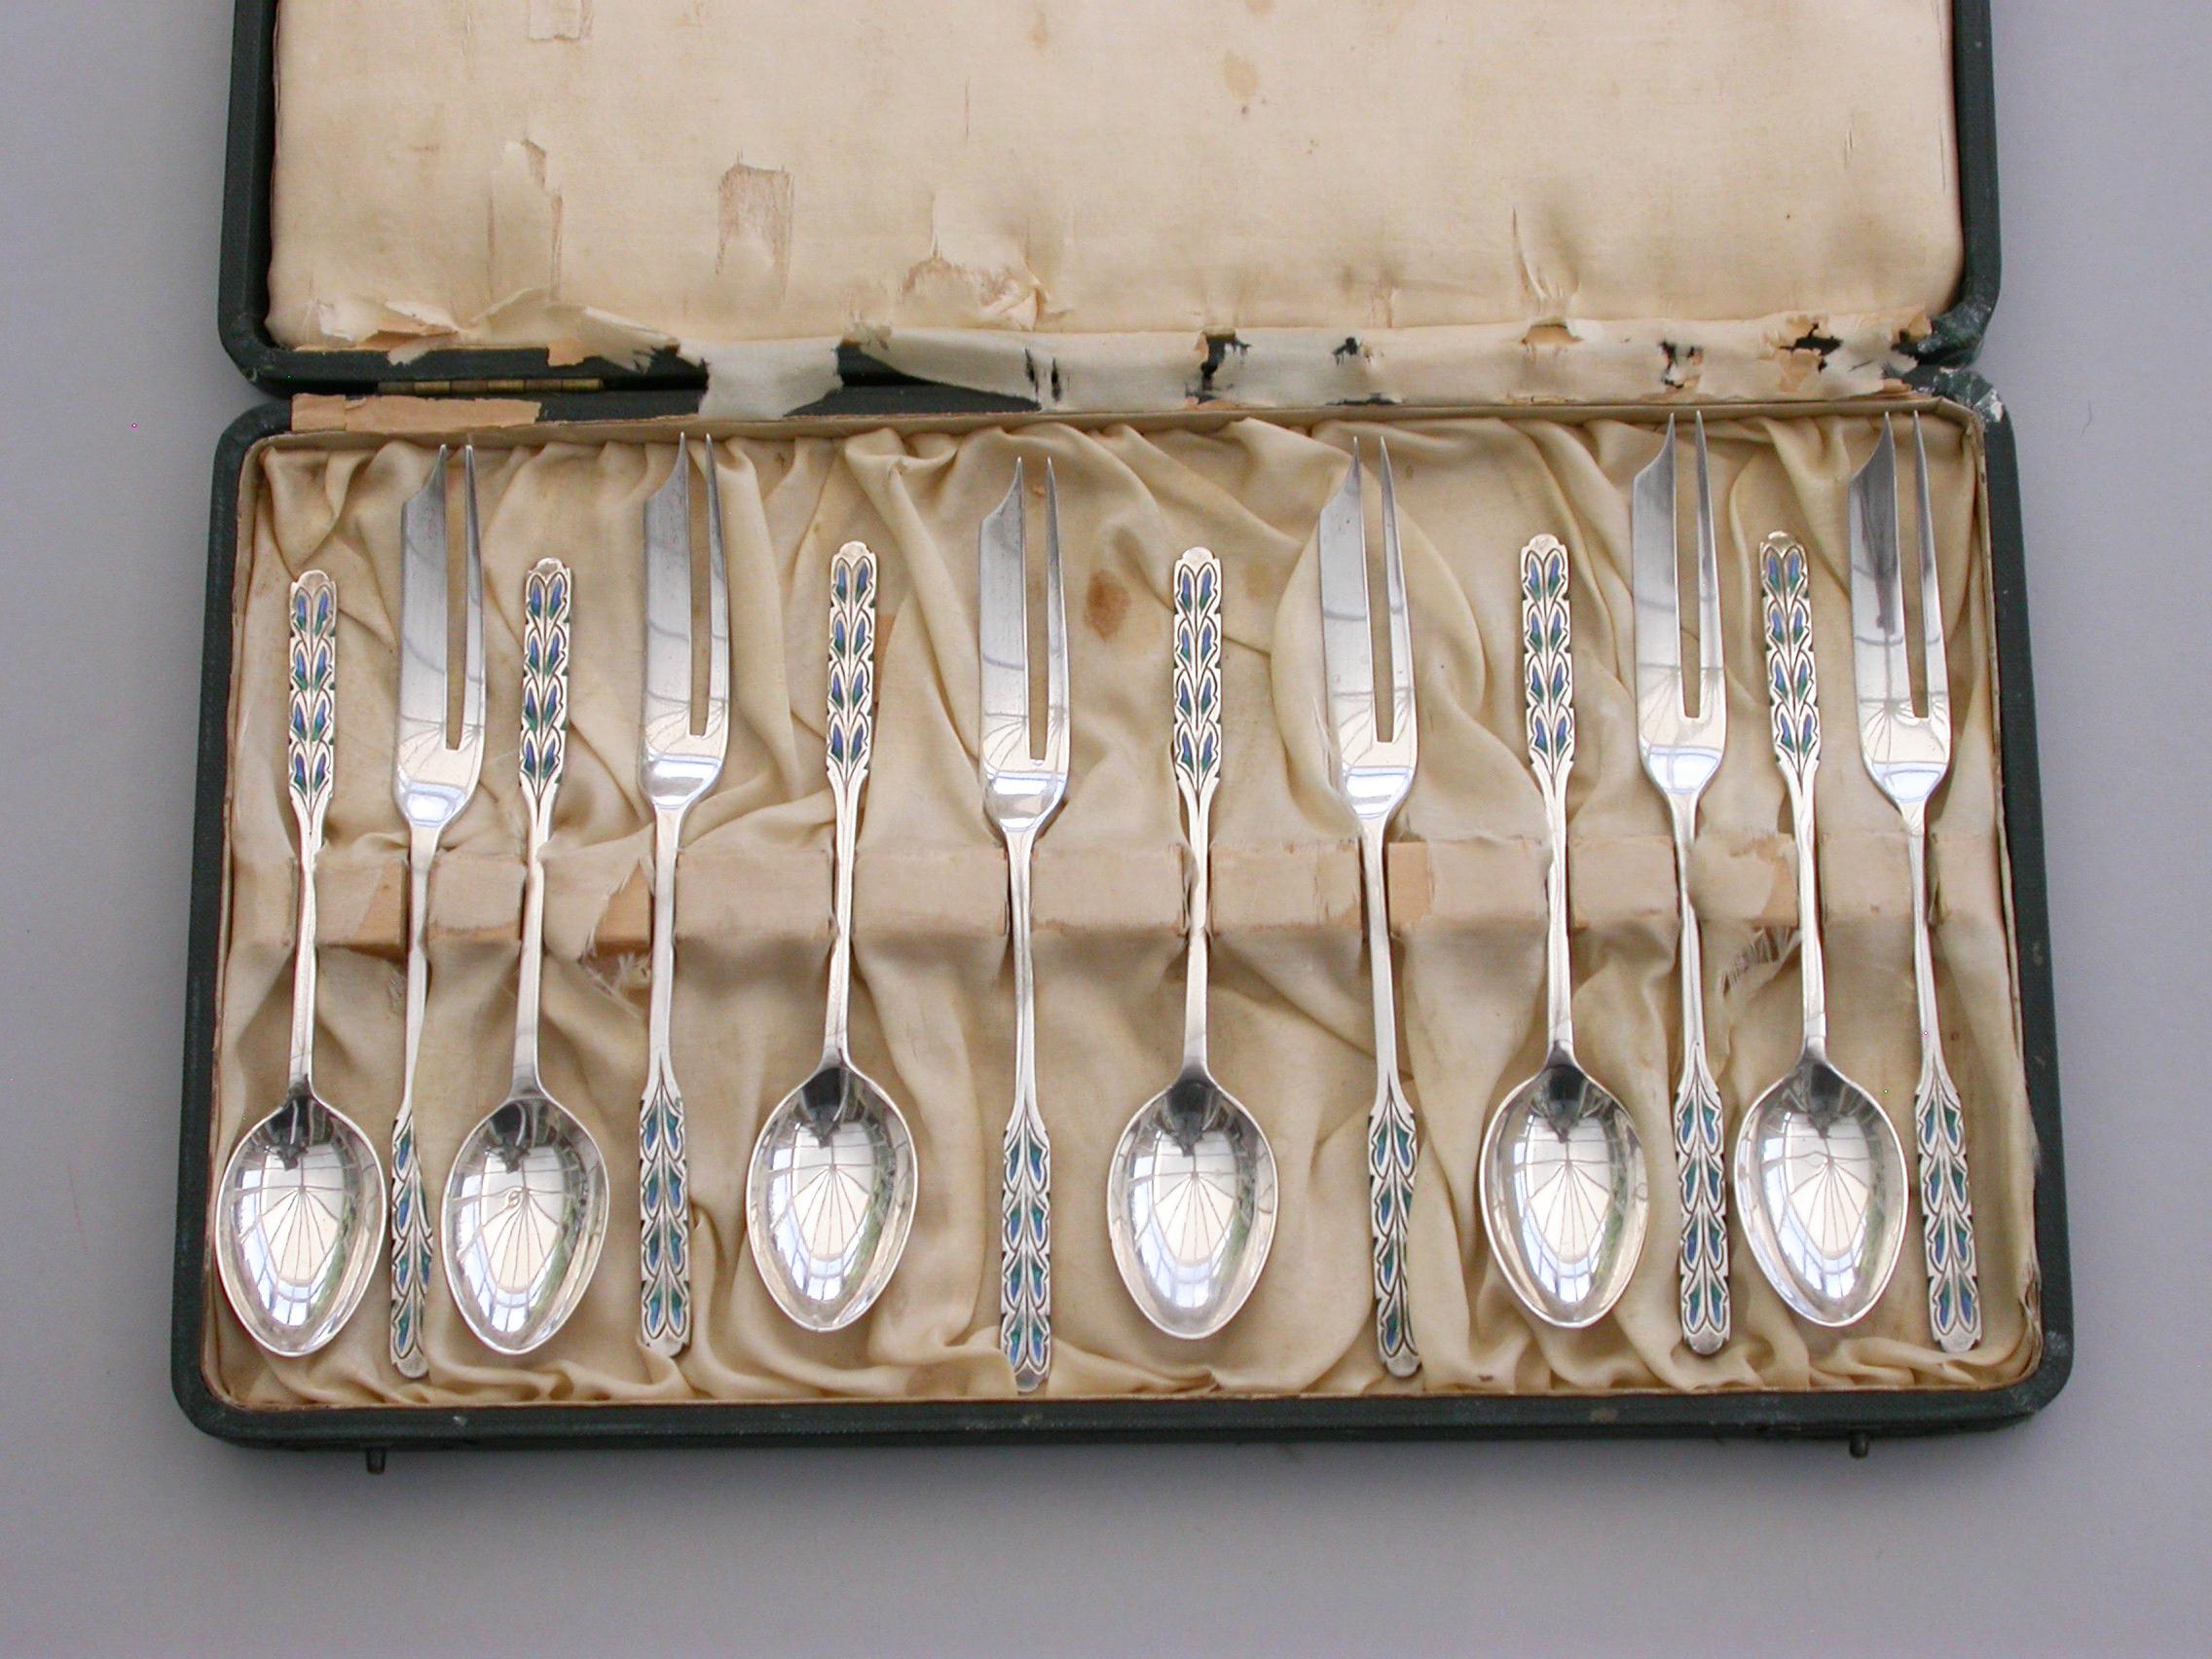 A good cased set of 12 silver and enamel pastry spoons and forks, the handles decorated with a stylised fern pattern in blue and green enamels. Complete with original Liberty retailers case.

By Liberty & Co, Birmingham, 1927 (Forks) 1928